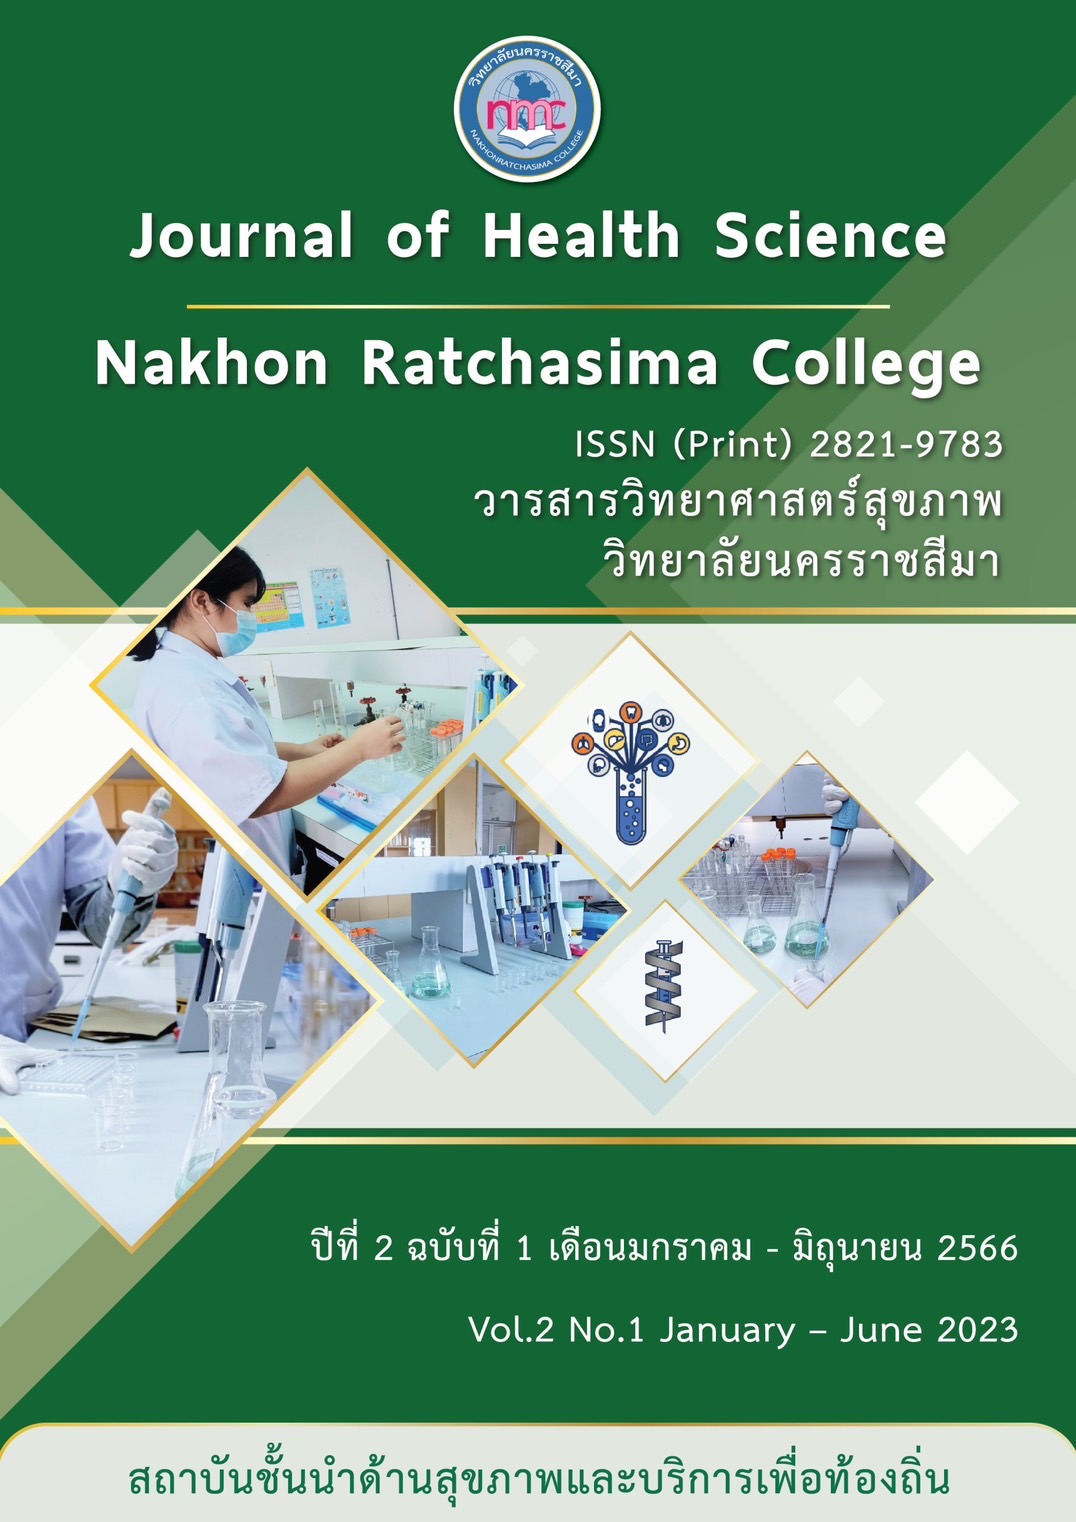 					View Vol. 2 No. 1 (2566): Journal of health science Nakhonratchasima College 
				